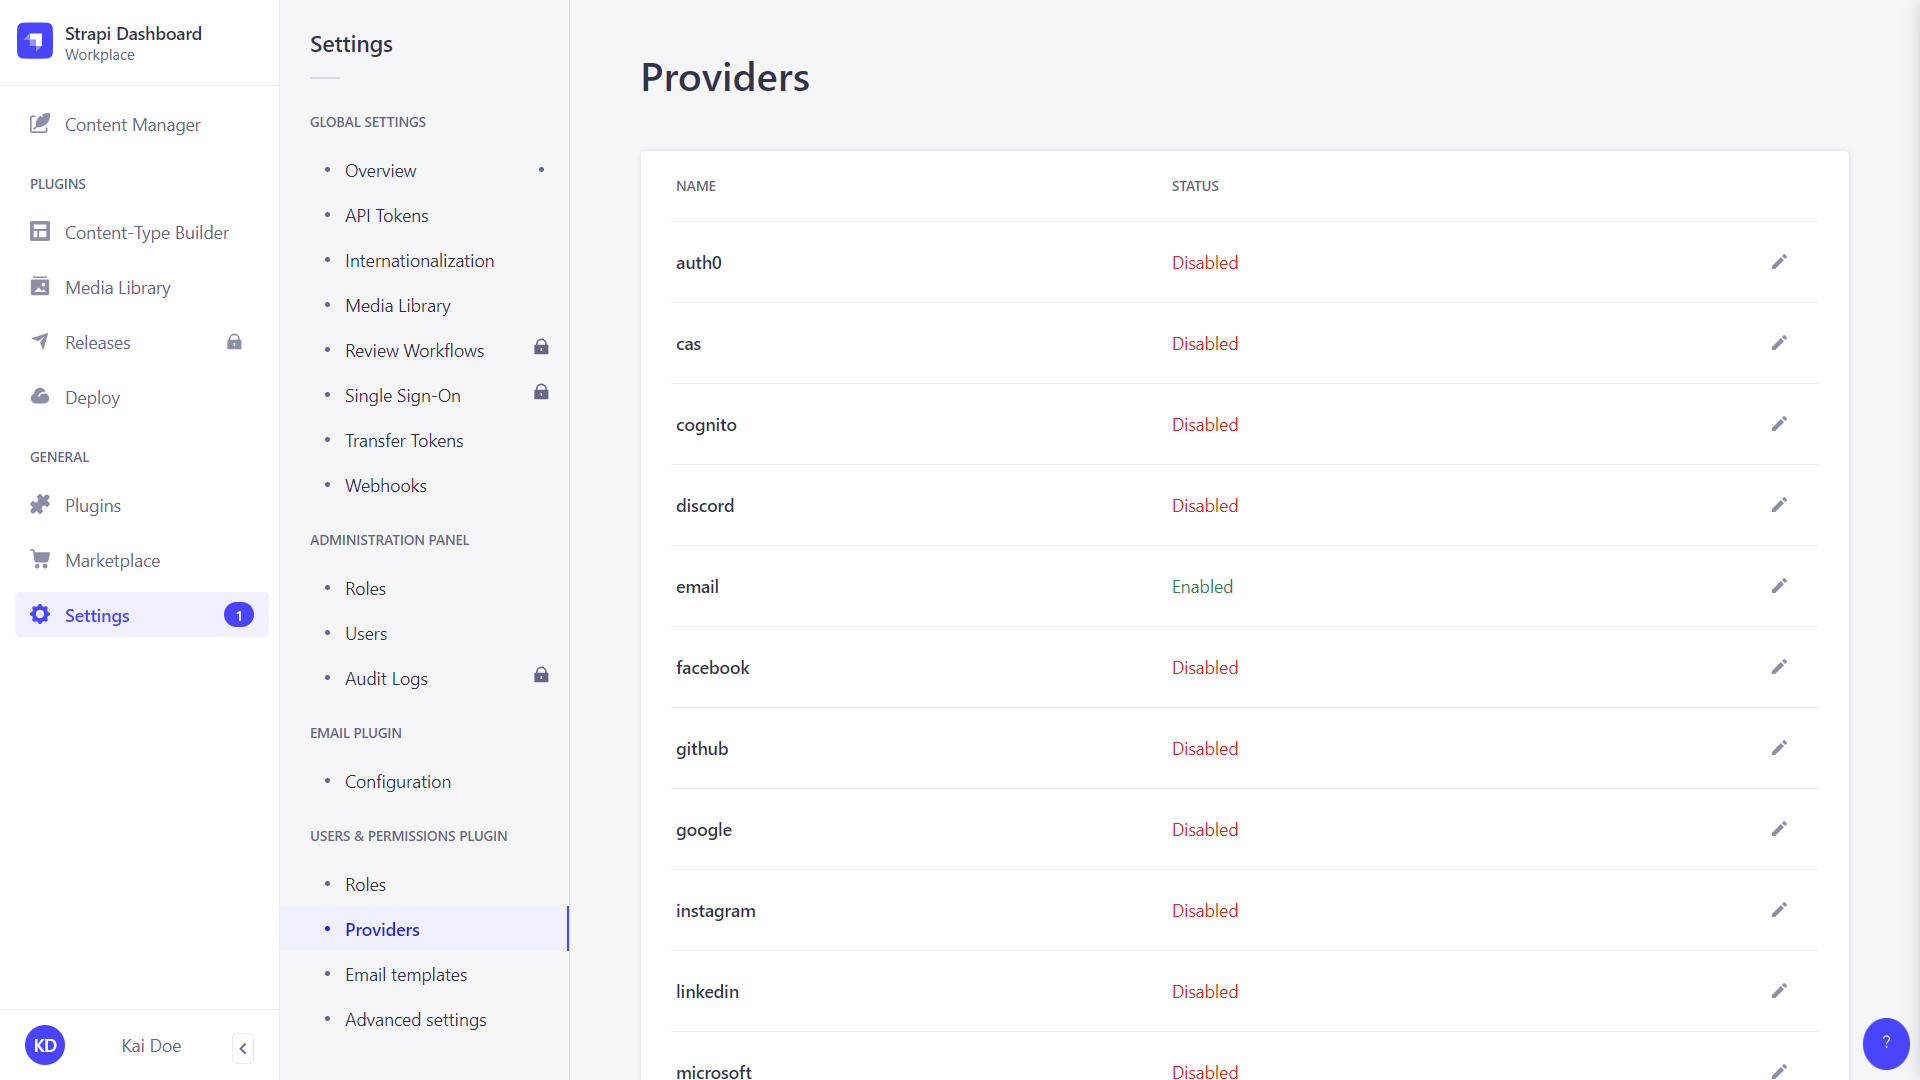 Providers interface